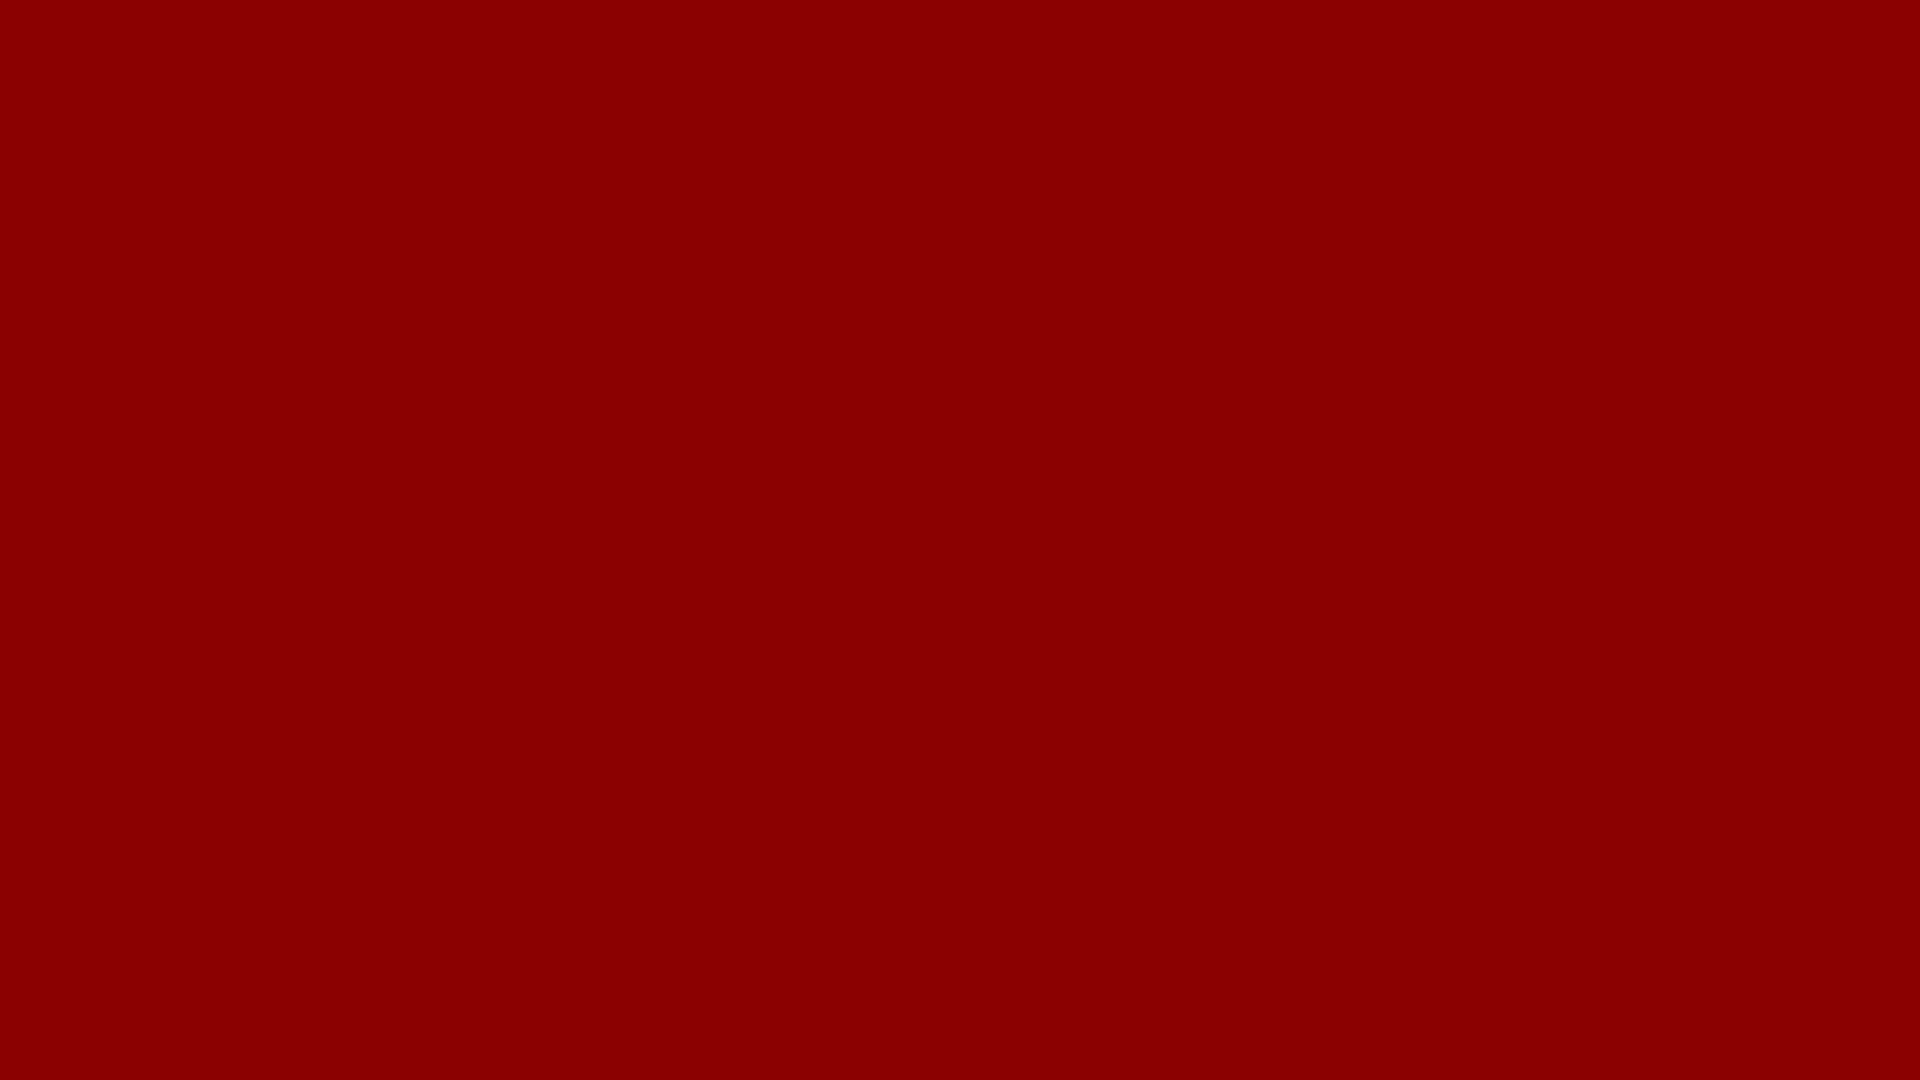 Gallery For Gt Solid Dark Red Background